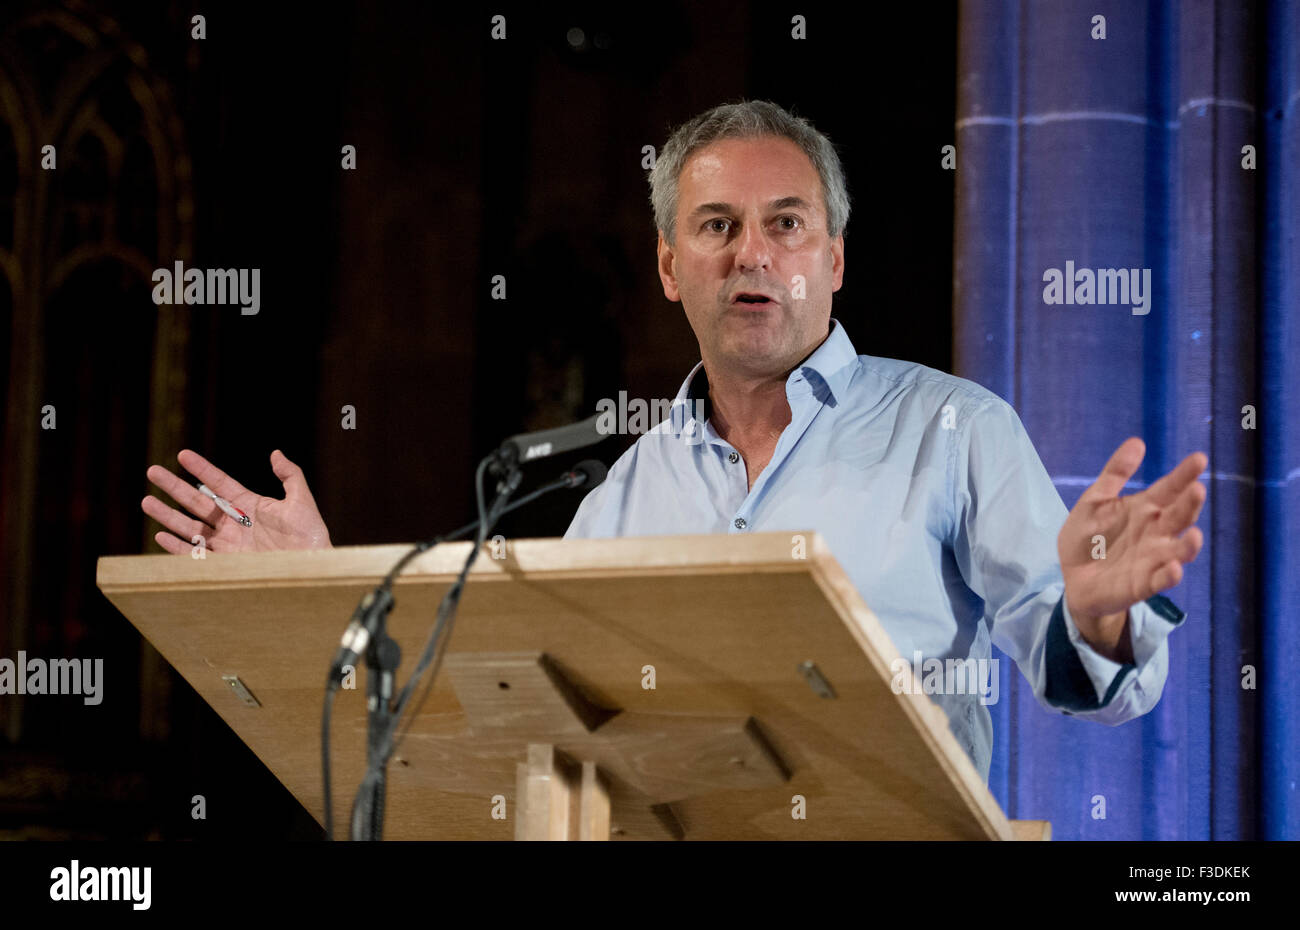 Manchester, UK. 5th October 2015. Kevin Maguire, Daily Mirror associate editor, speaks at the People's Post Rally event at Manchester Cathedral. Credit:  Russell Hart/Alamy Live News. Stock Photo